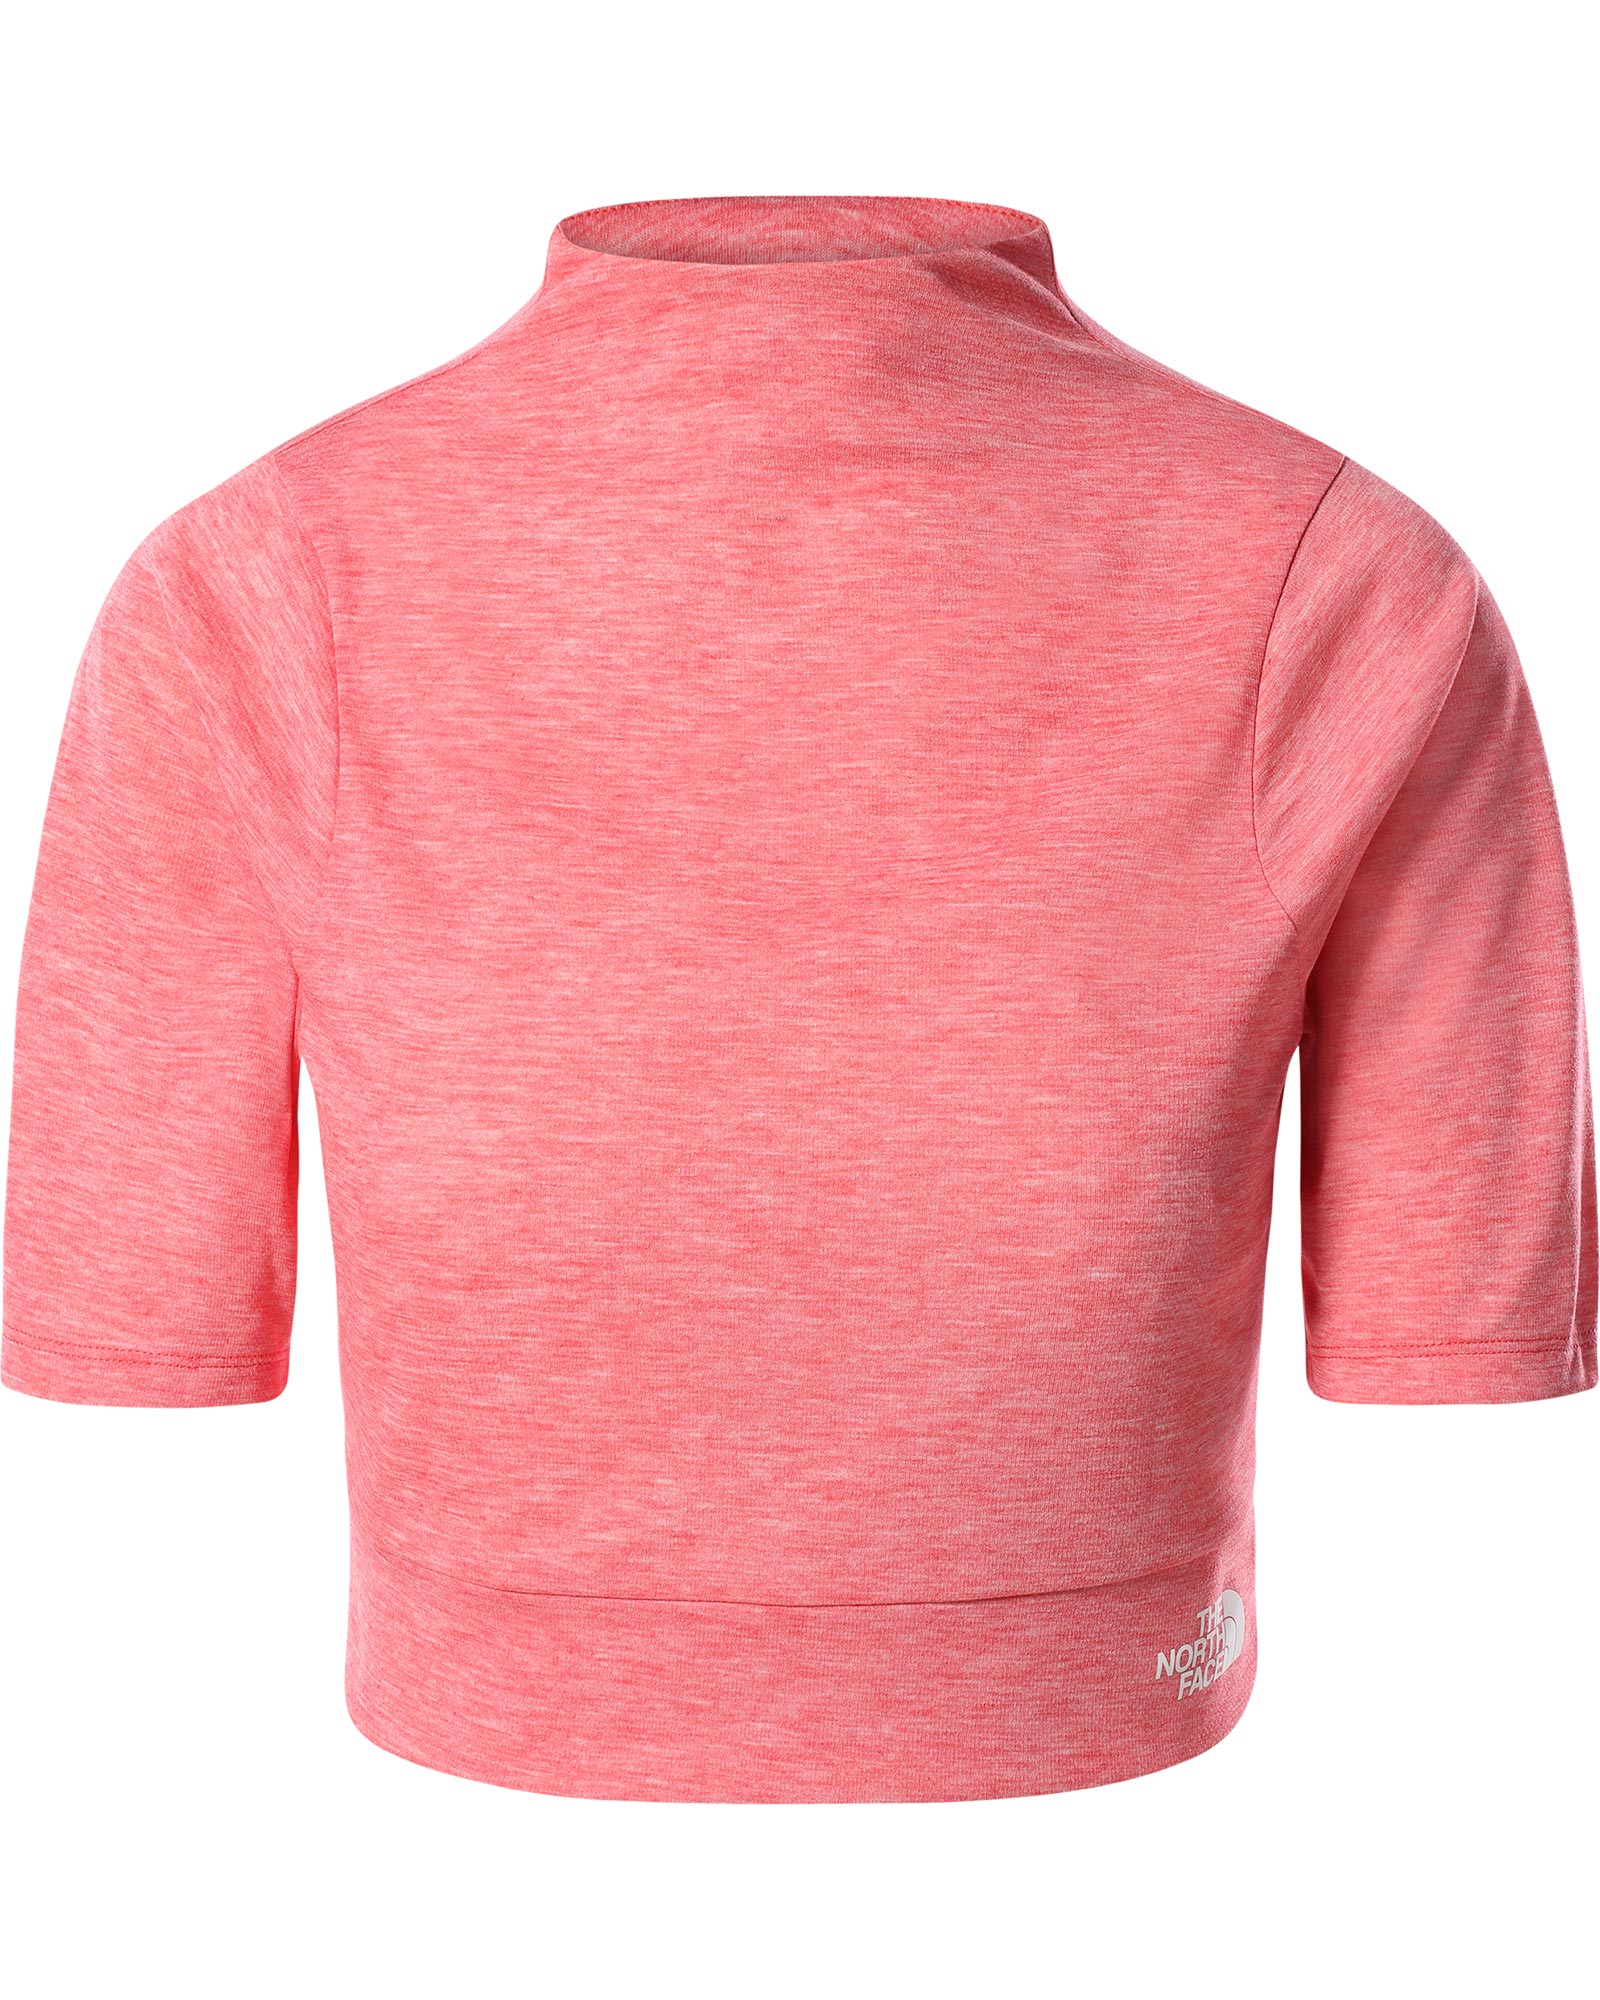 Product image of The North Face Vyrtue Women's Crop Top